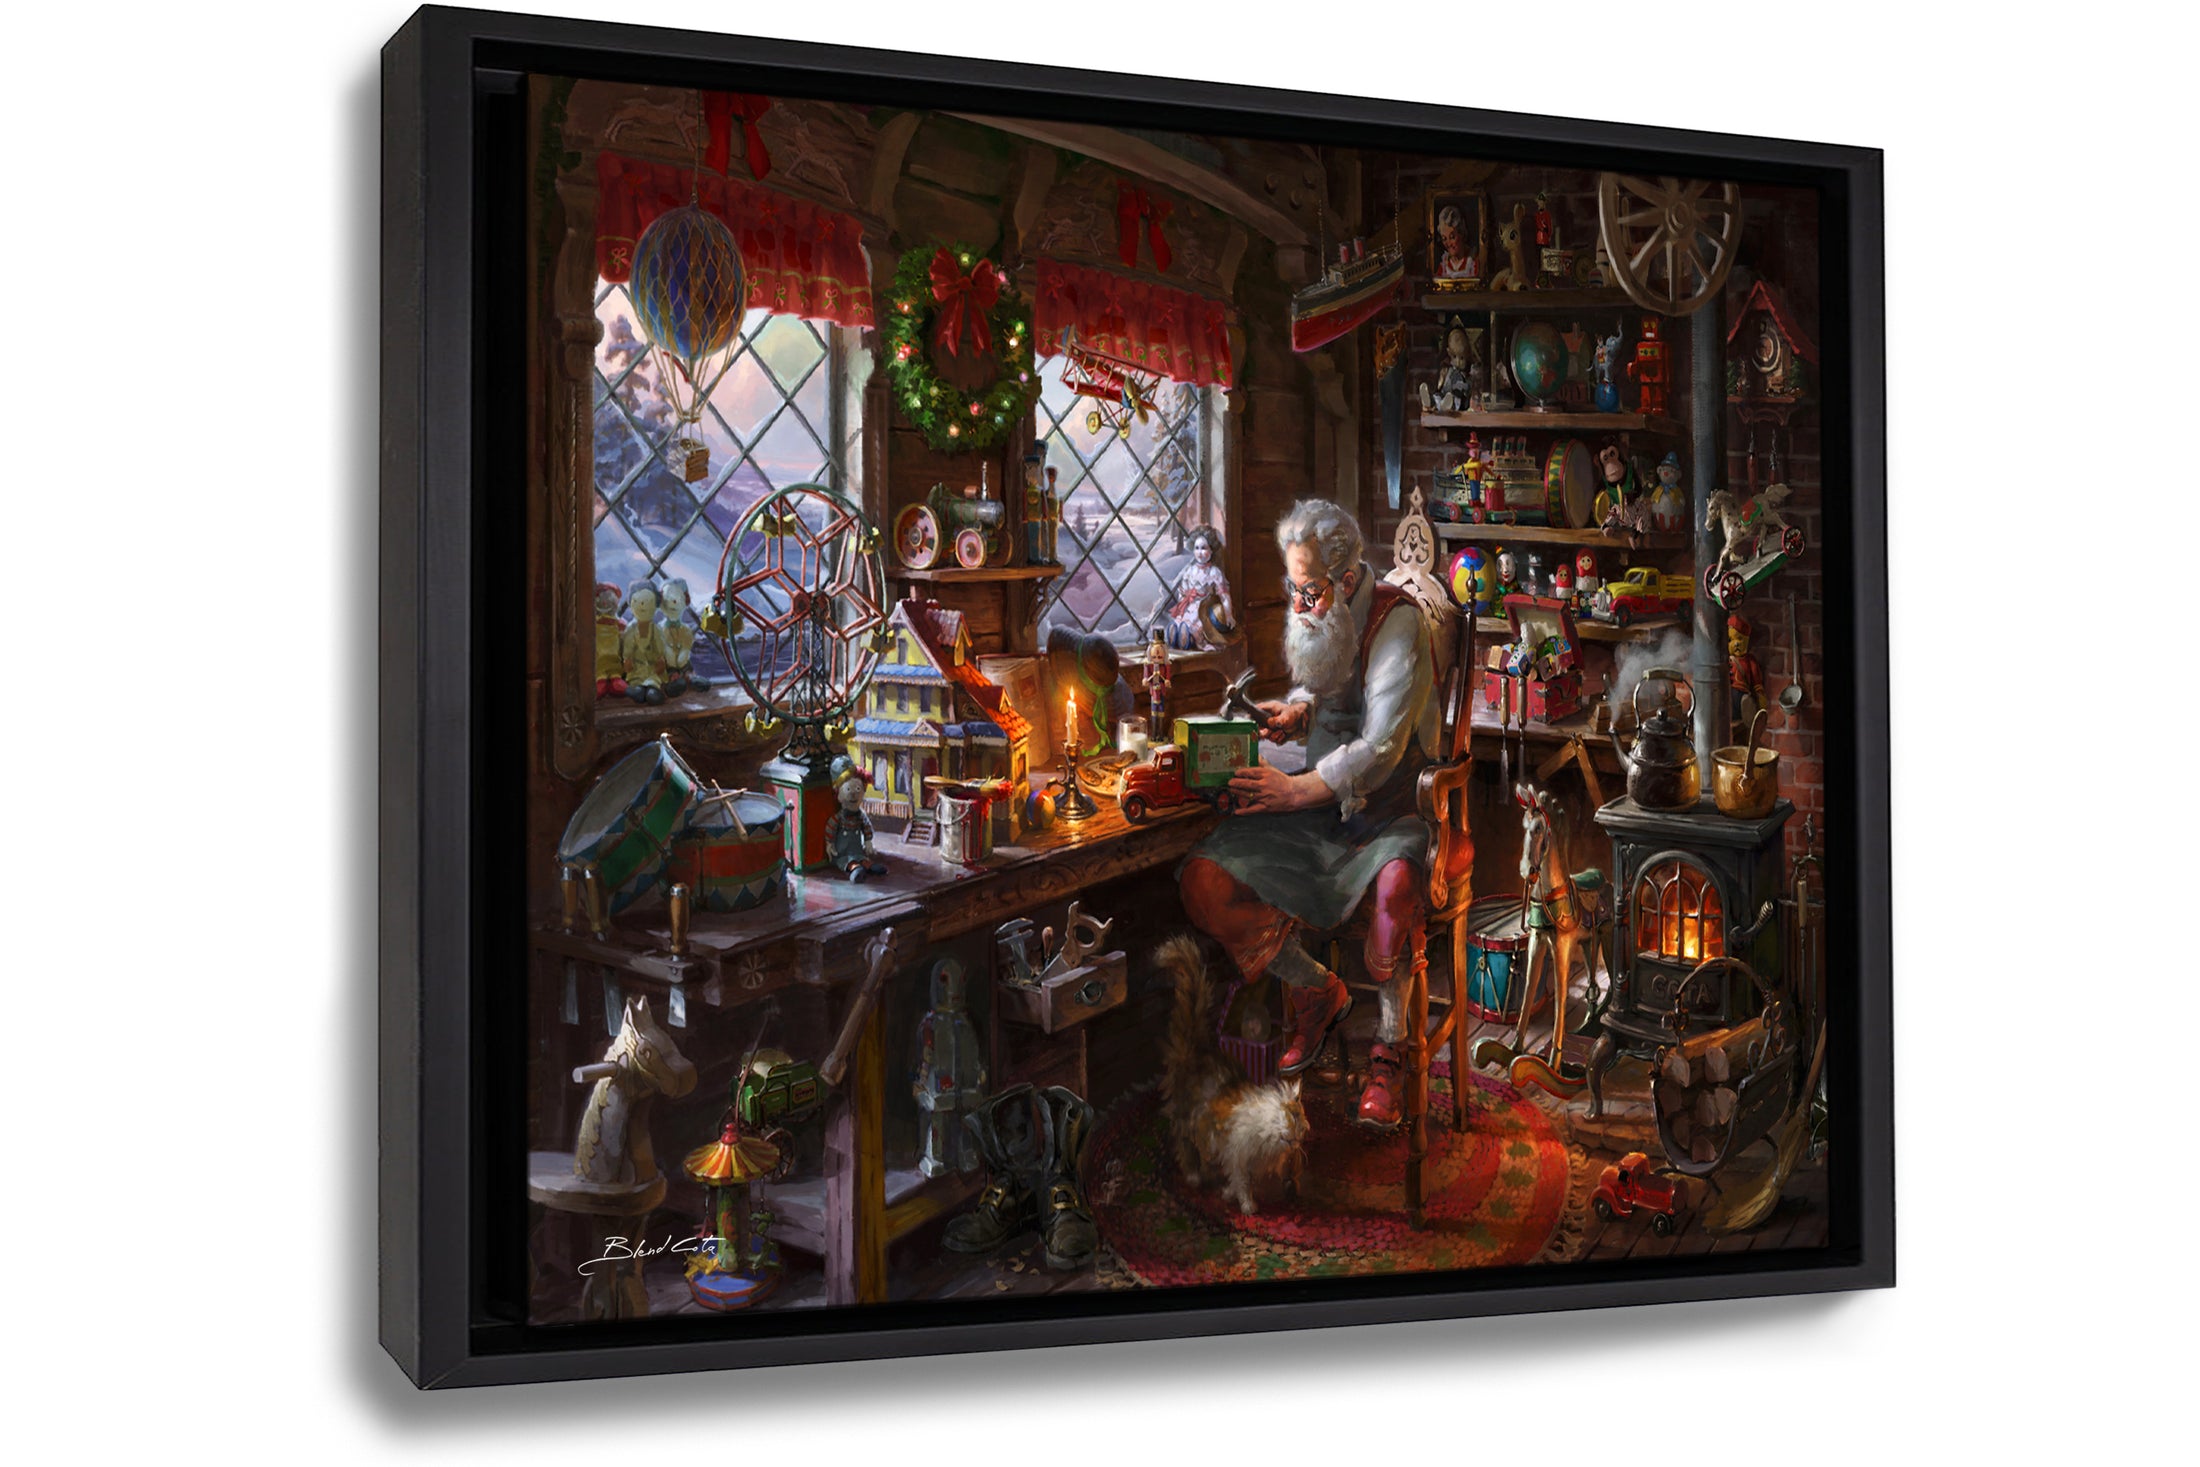 A framed art print on canvas of the painting of Santa claus making toys in his workshop  during christmas with a cat by his boots and wood burning stove amongst the many children's toys.